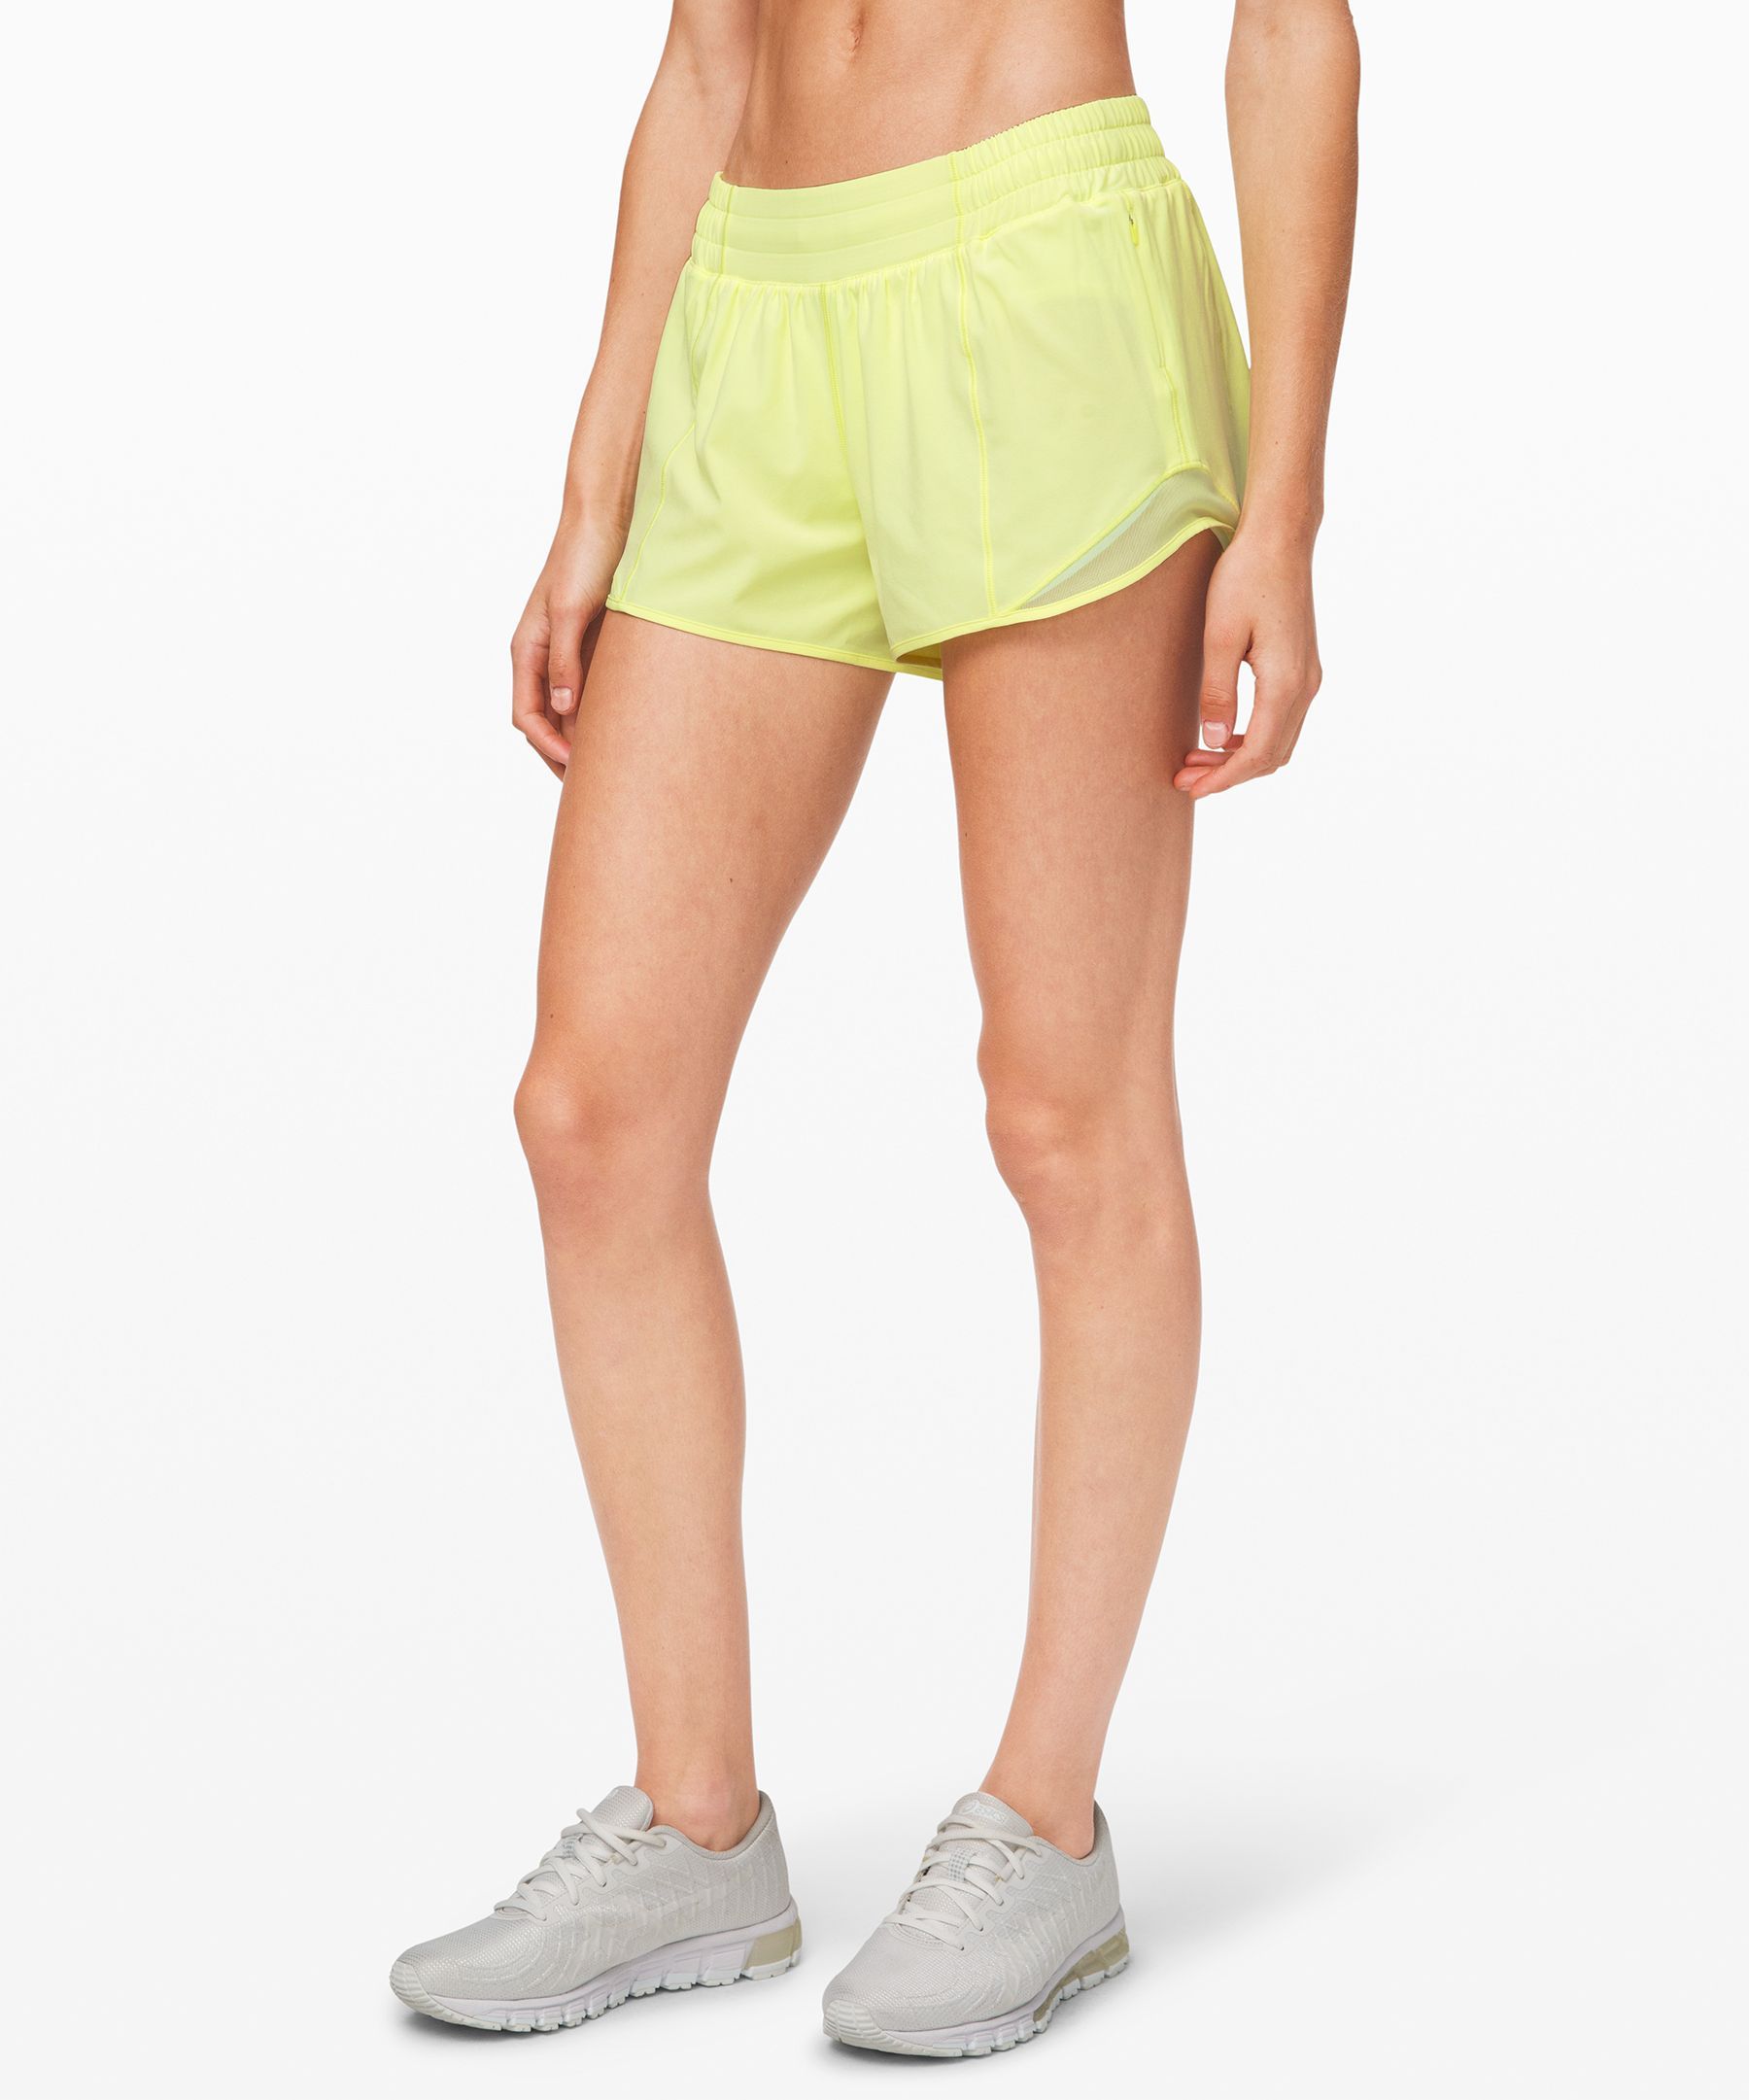 Hotty Hot Low-Rise Lined Short